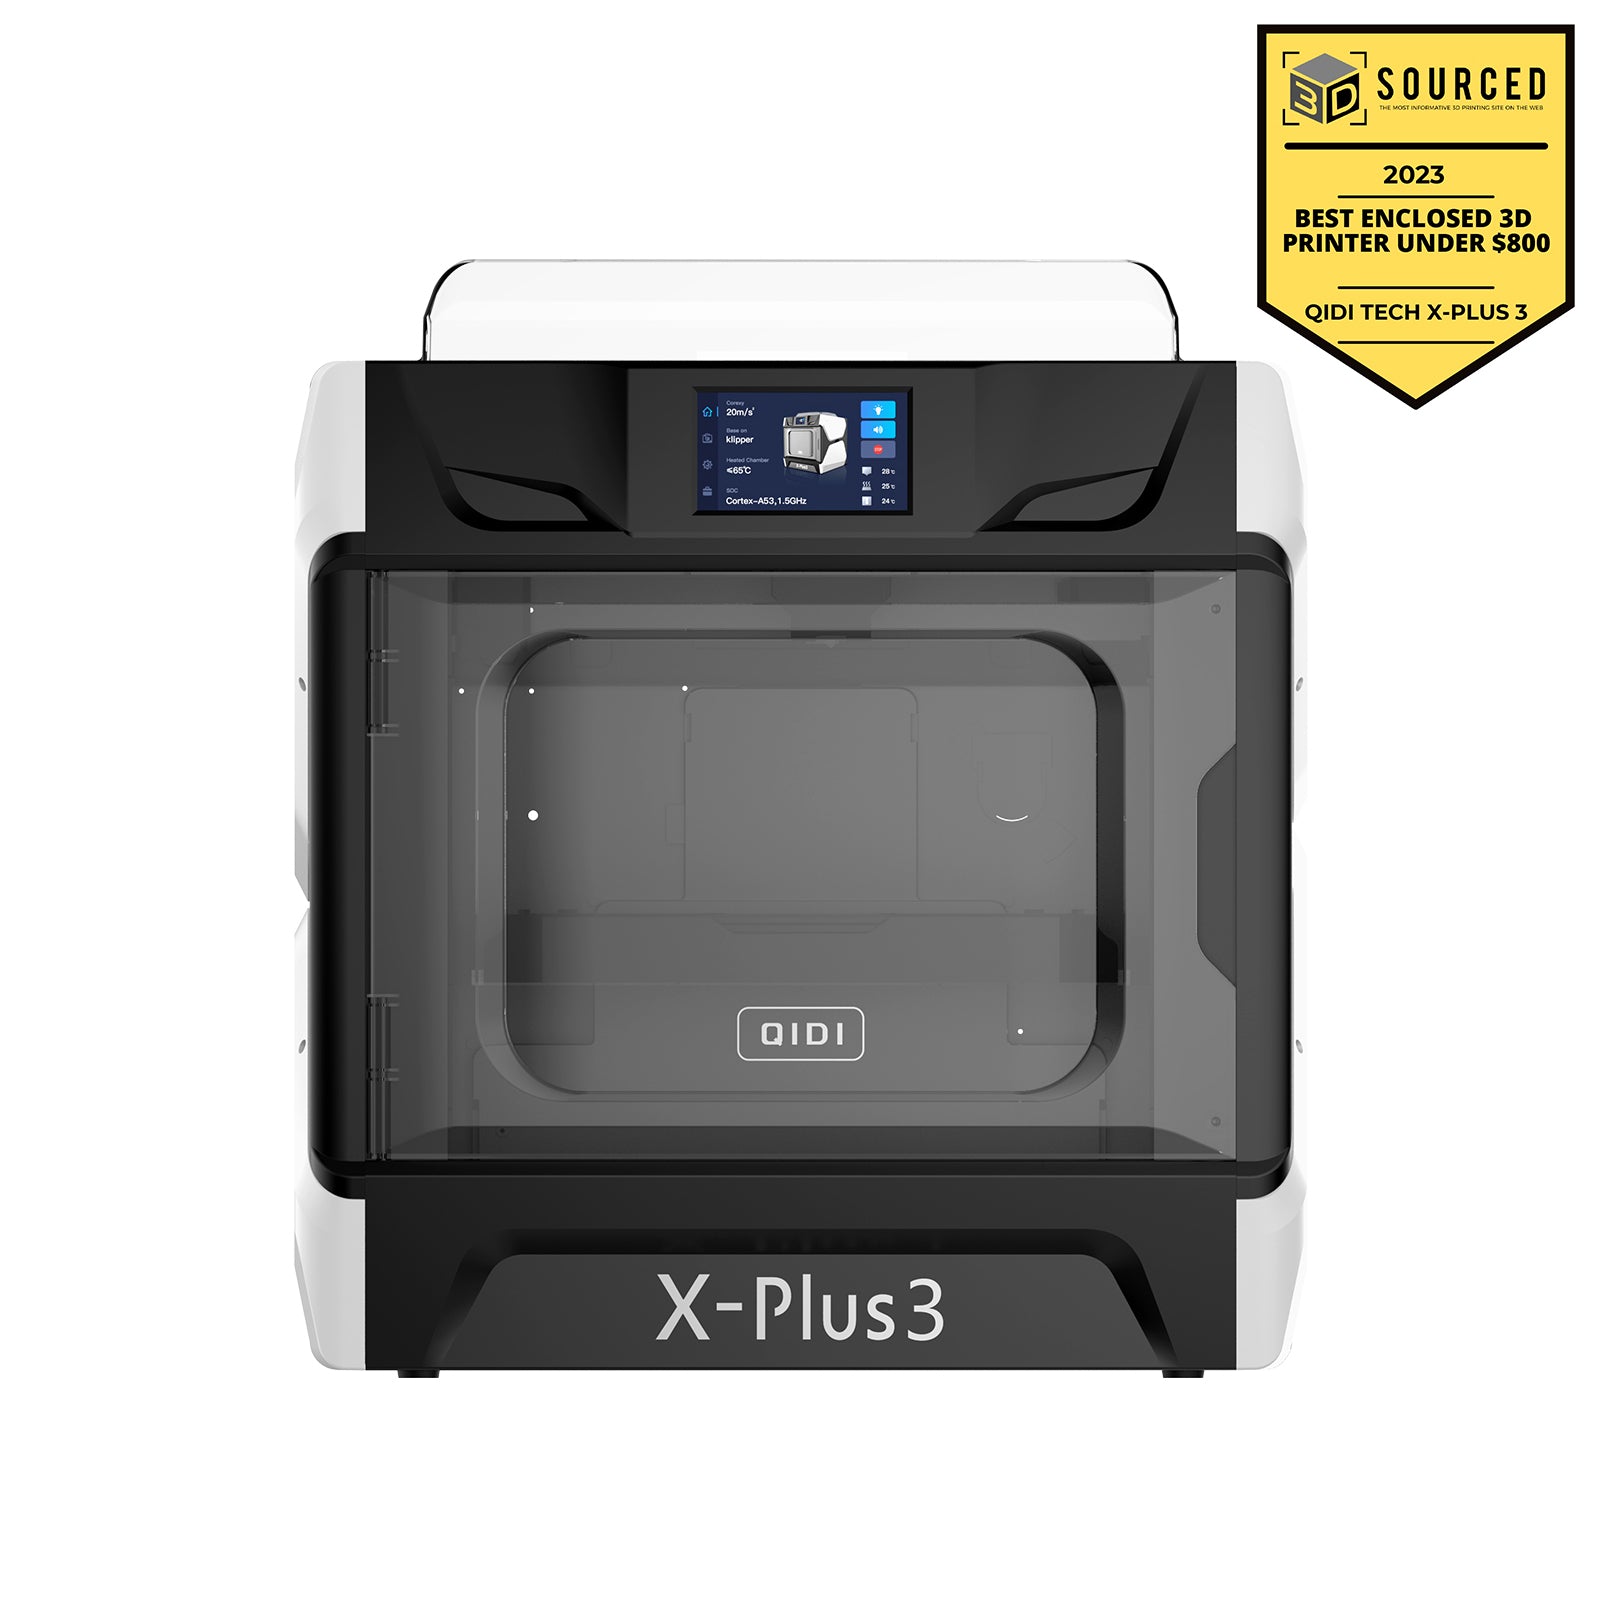 Qidi Tech X-Plus 3 3D Printer,Awarded as the best enclosed 3d printer under $800 in 2023